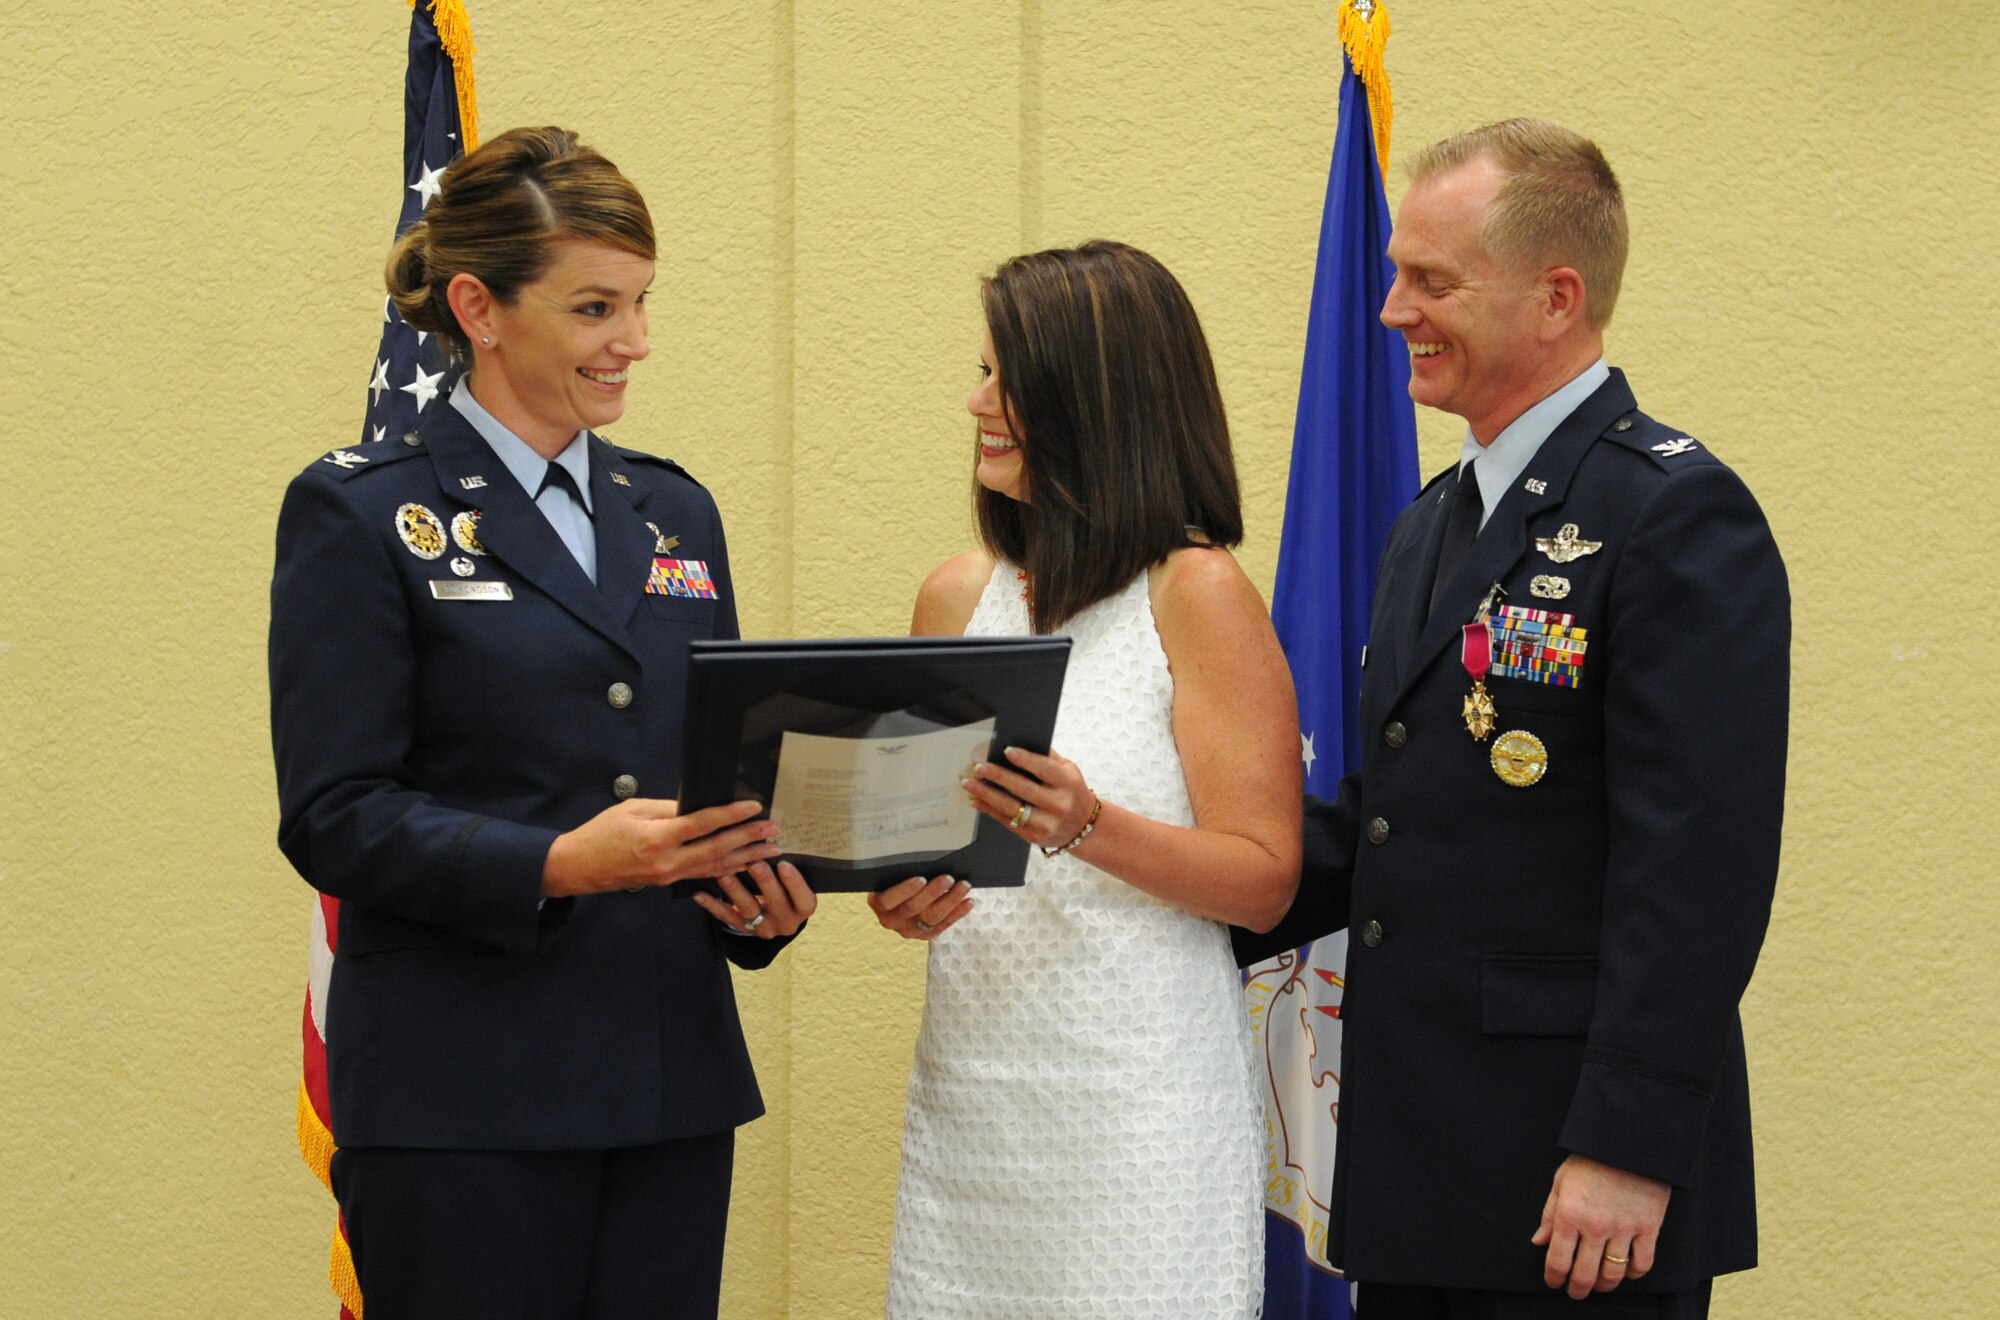 Col. Michele Edmondson, 81st Training Wing commander, presents an Air Force certificate of appreciation to Mary Scarborough, the spouse of Col. Dennis Scarborough, 81st TRW vice commander, during his retirement ceremony at the Bay Breeze Event Center June 28, 2016, on Keesler Air Force Base, Miss. Scarborough retired with 27 years of military service. He has served multiple tours as an F-15C instructor and evaluator and has held positions in the fields of defense policy, operational plans, safety and aircraft maintenance. He has commanded at the squadron level and served as an operations group deputy commander. (U.S. Air Force photo by Kemberly Groue/Released)